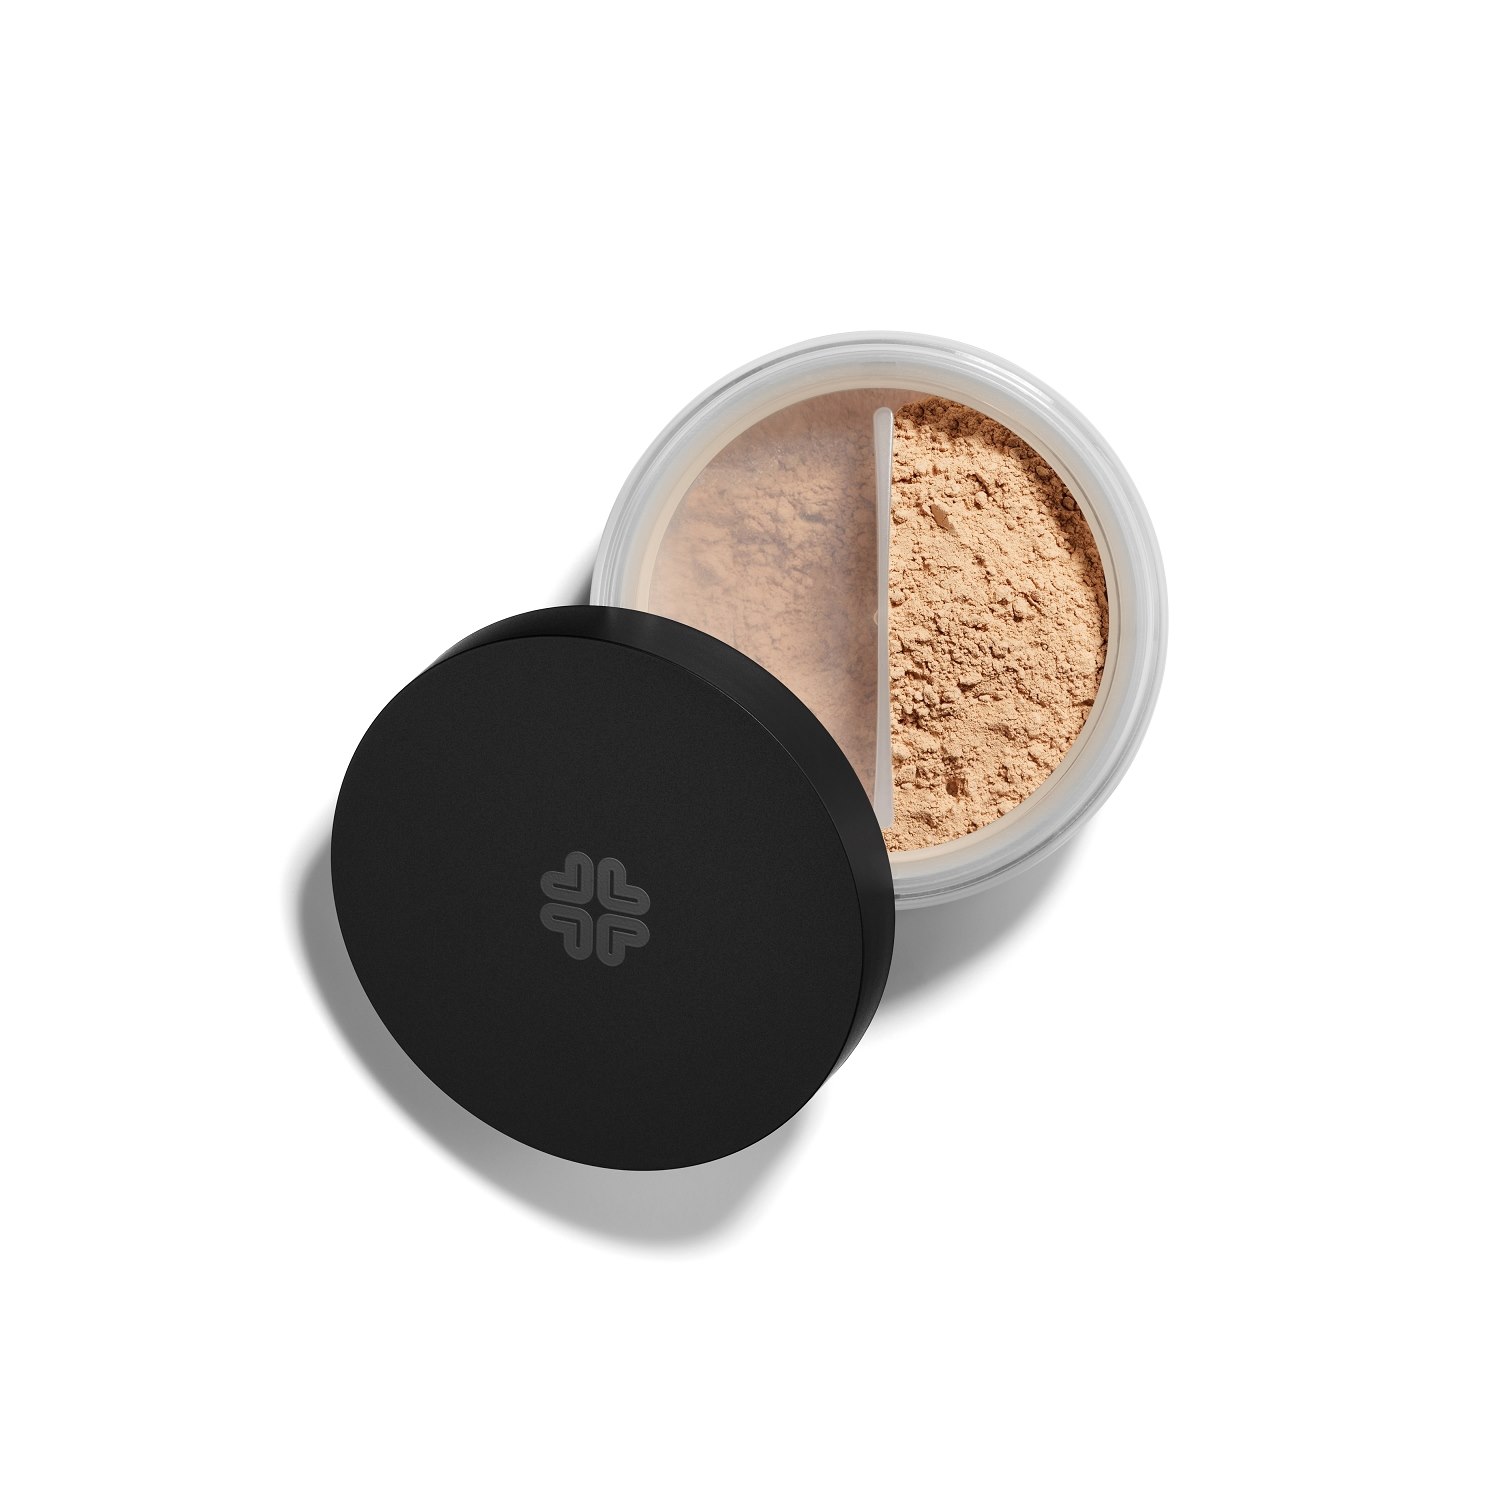 Lily Lolo Mineral Foundation SPF 15, 10 g Warm Honey